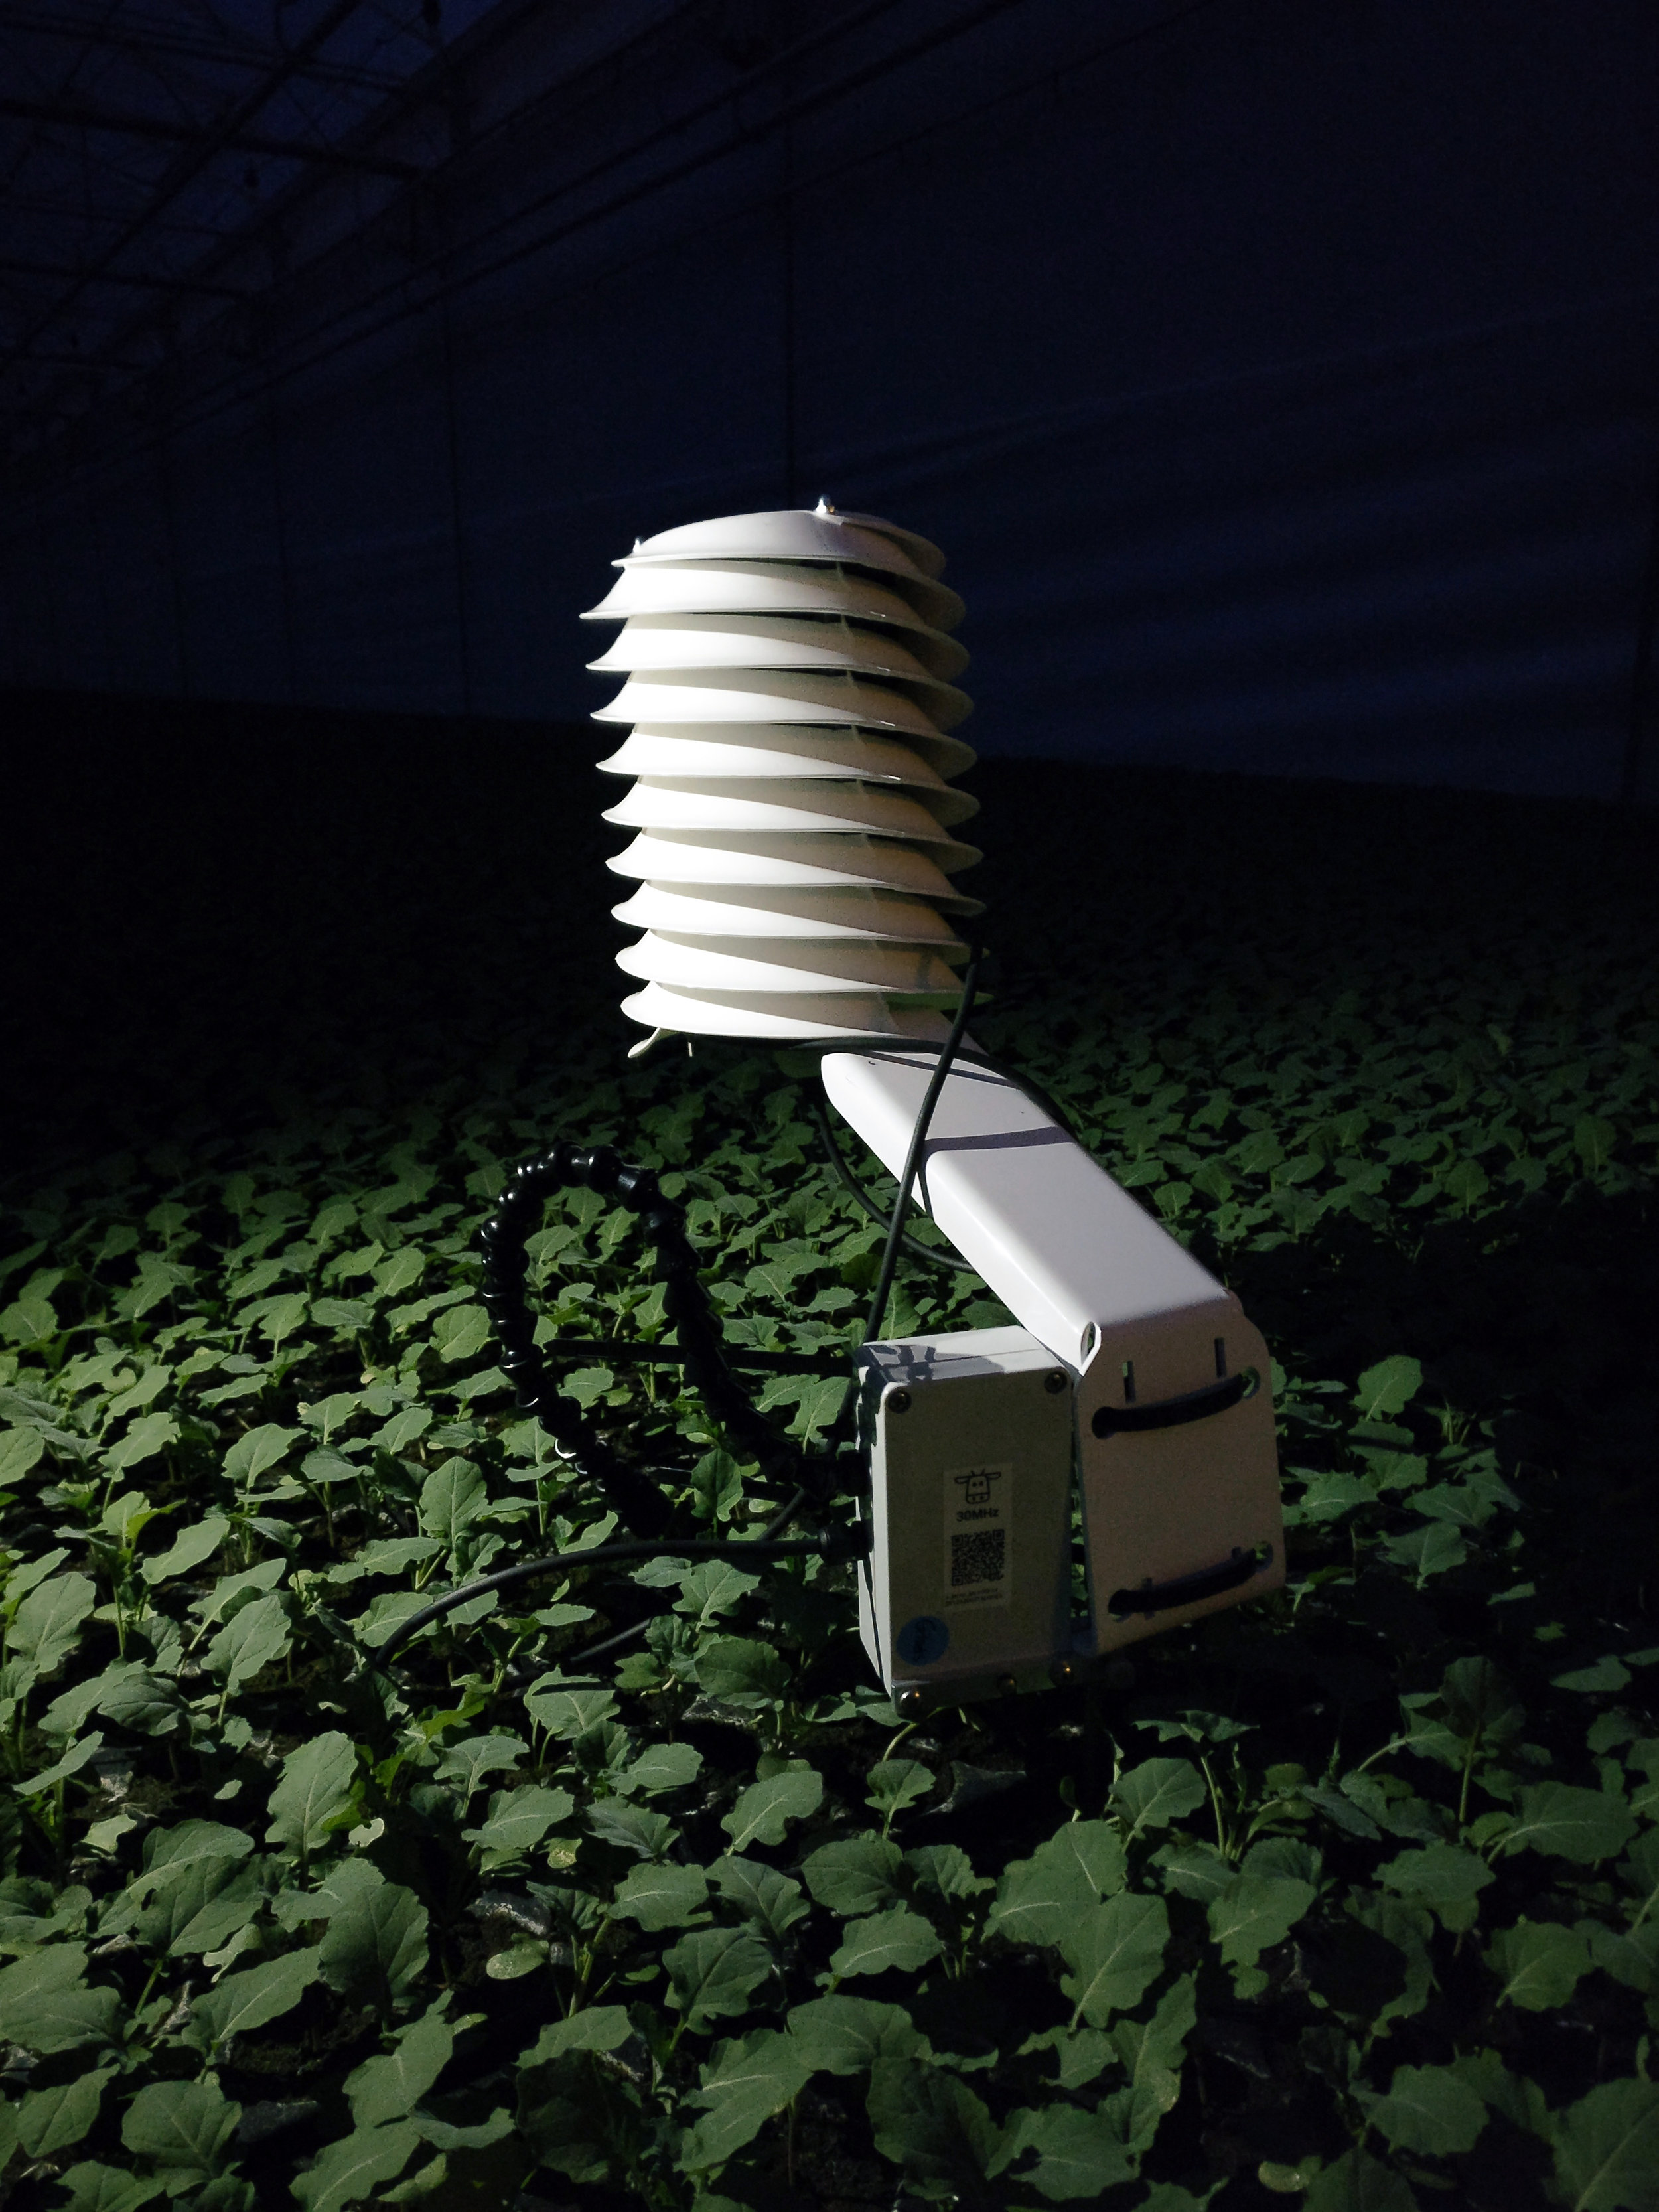 MeteoShield Professional solar radiation shield at night in agriculture